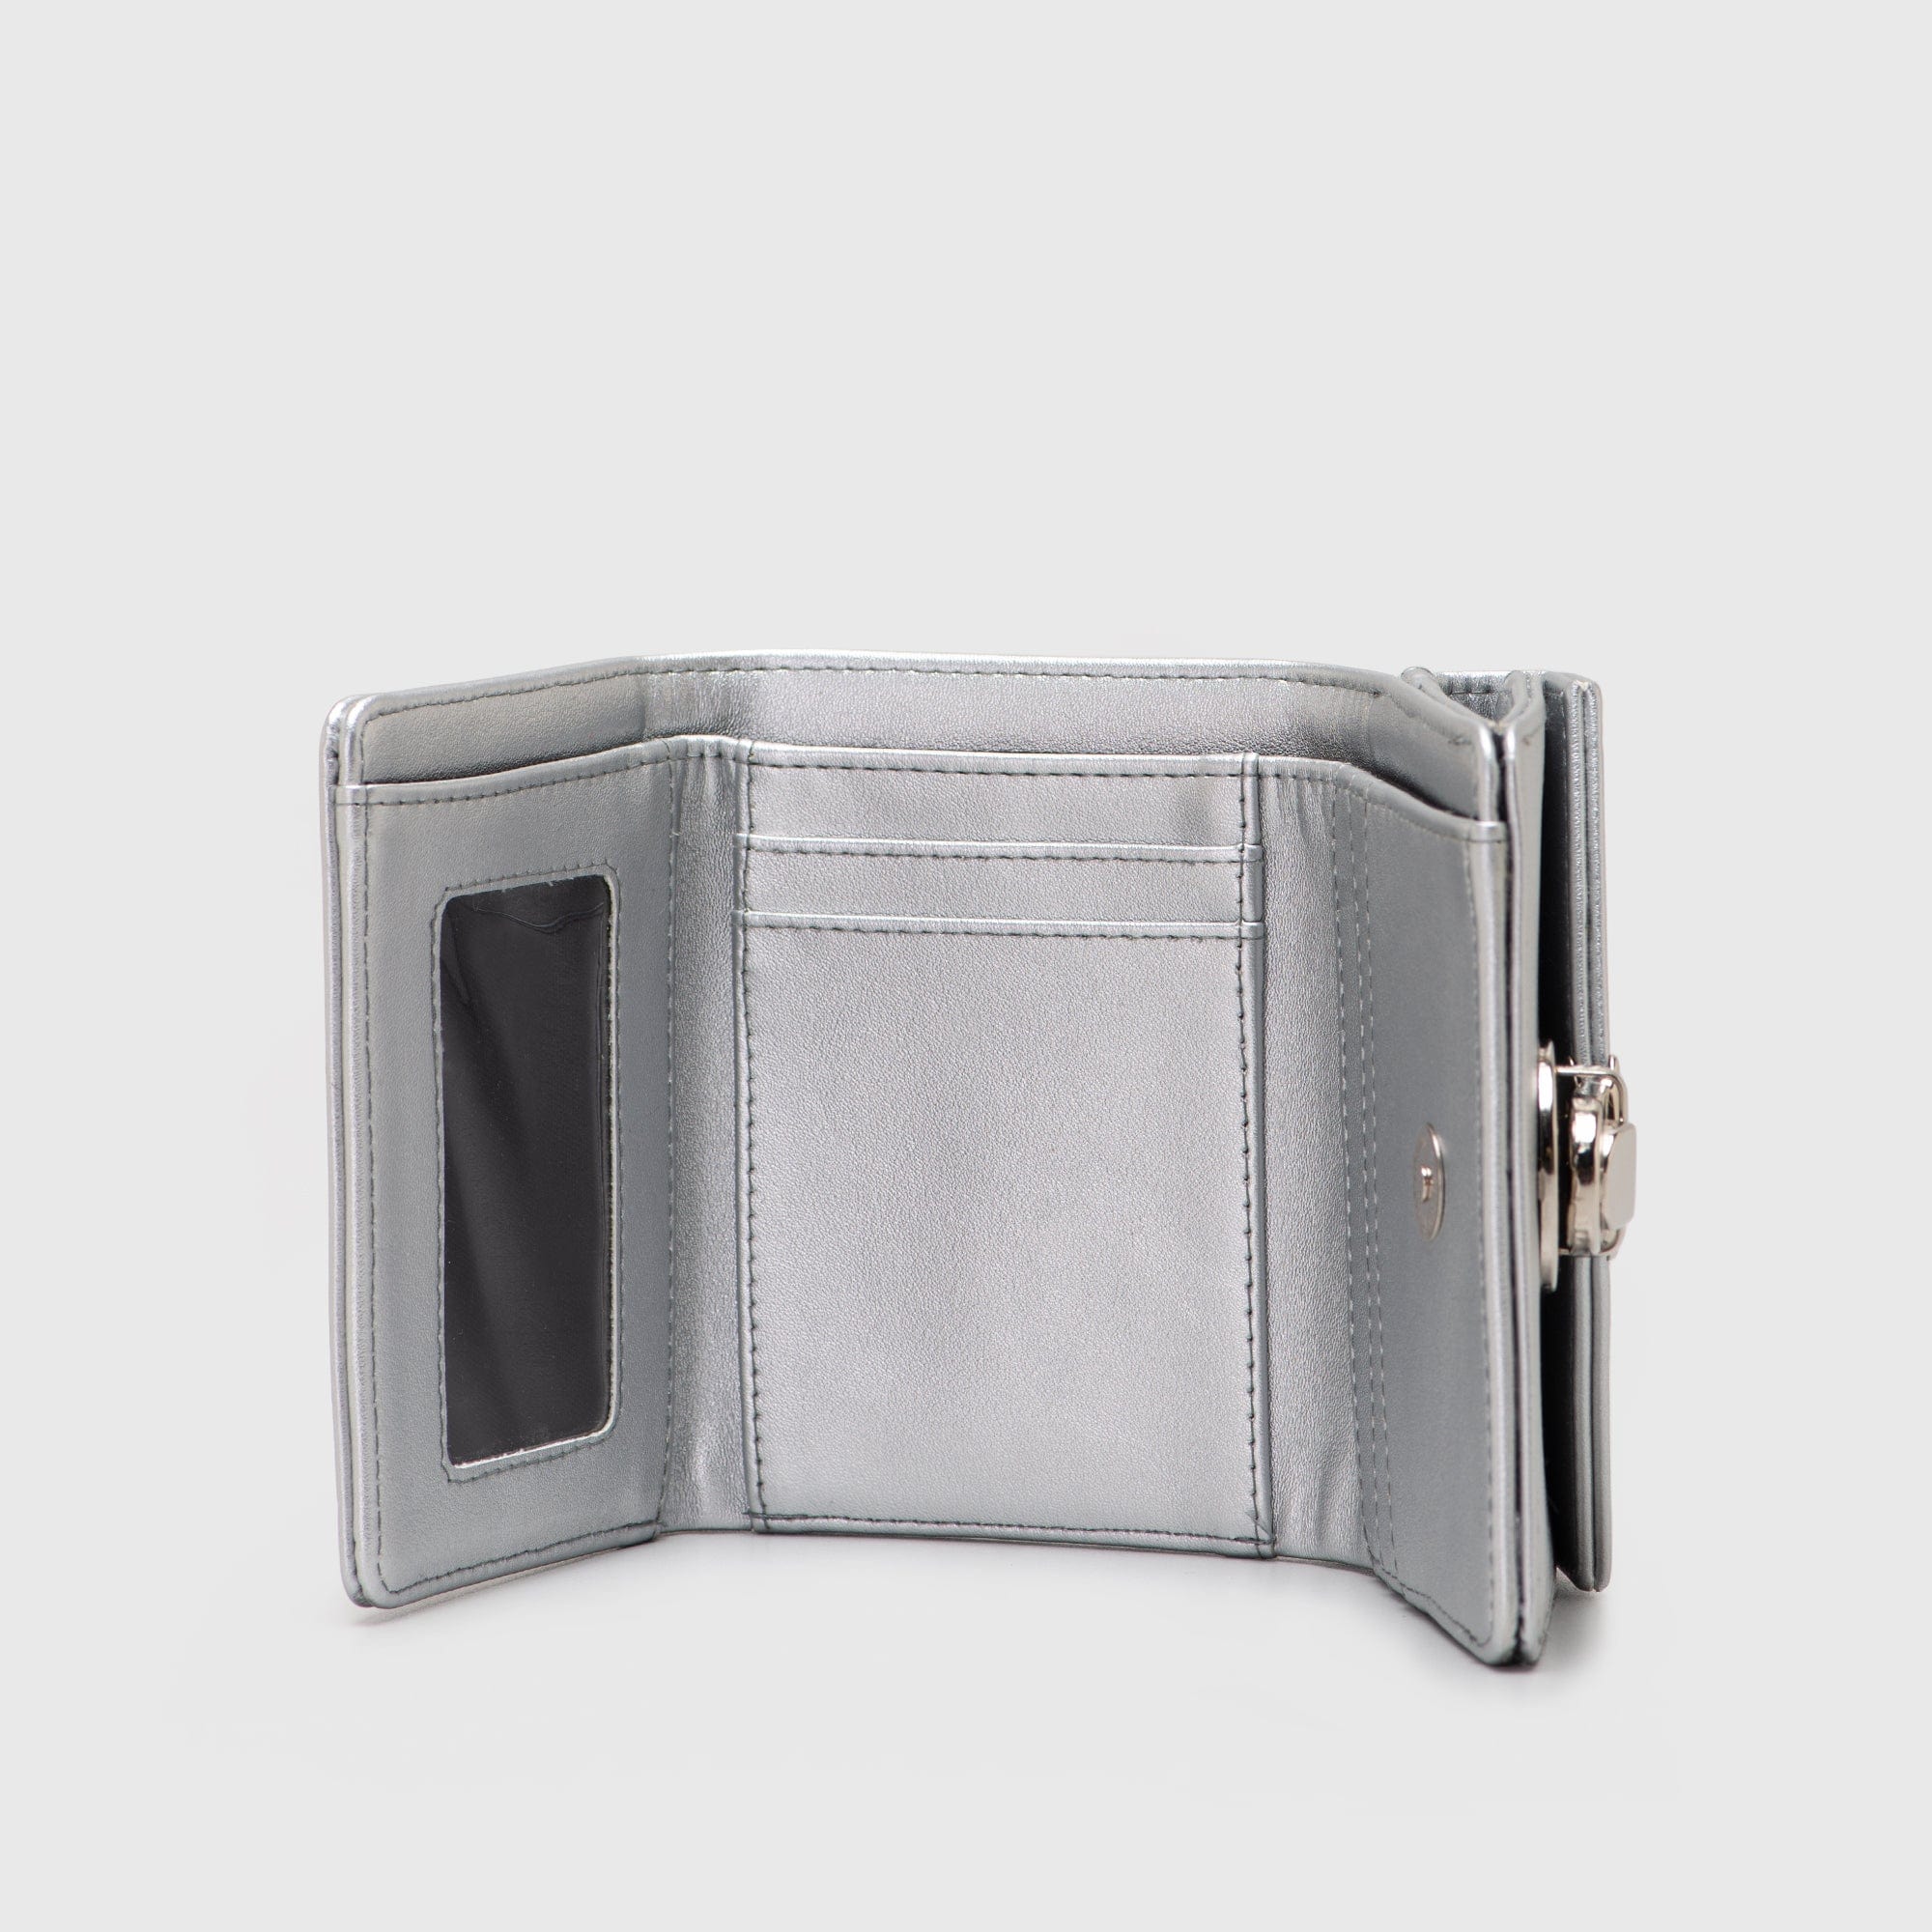 Adorable Projects Official Adorableprojects - Motta Wallet Silver - Dompet Wanita